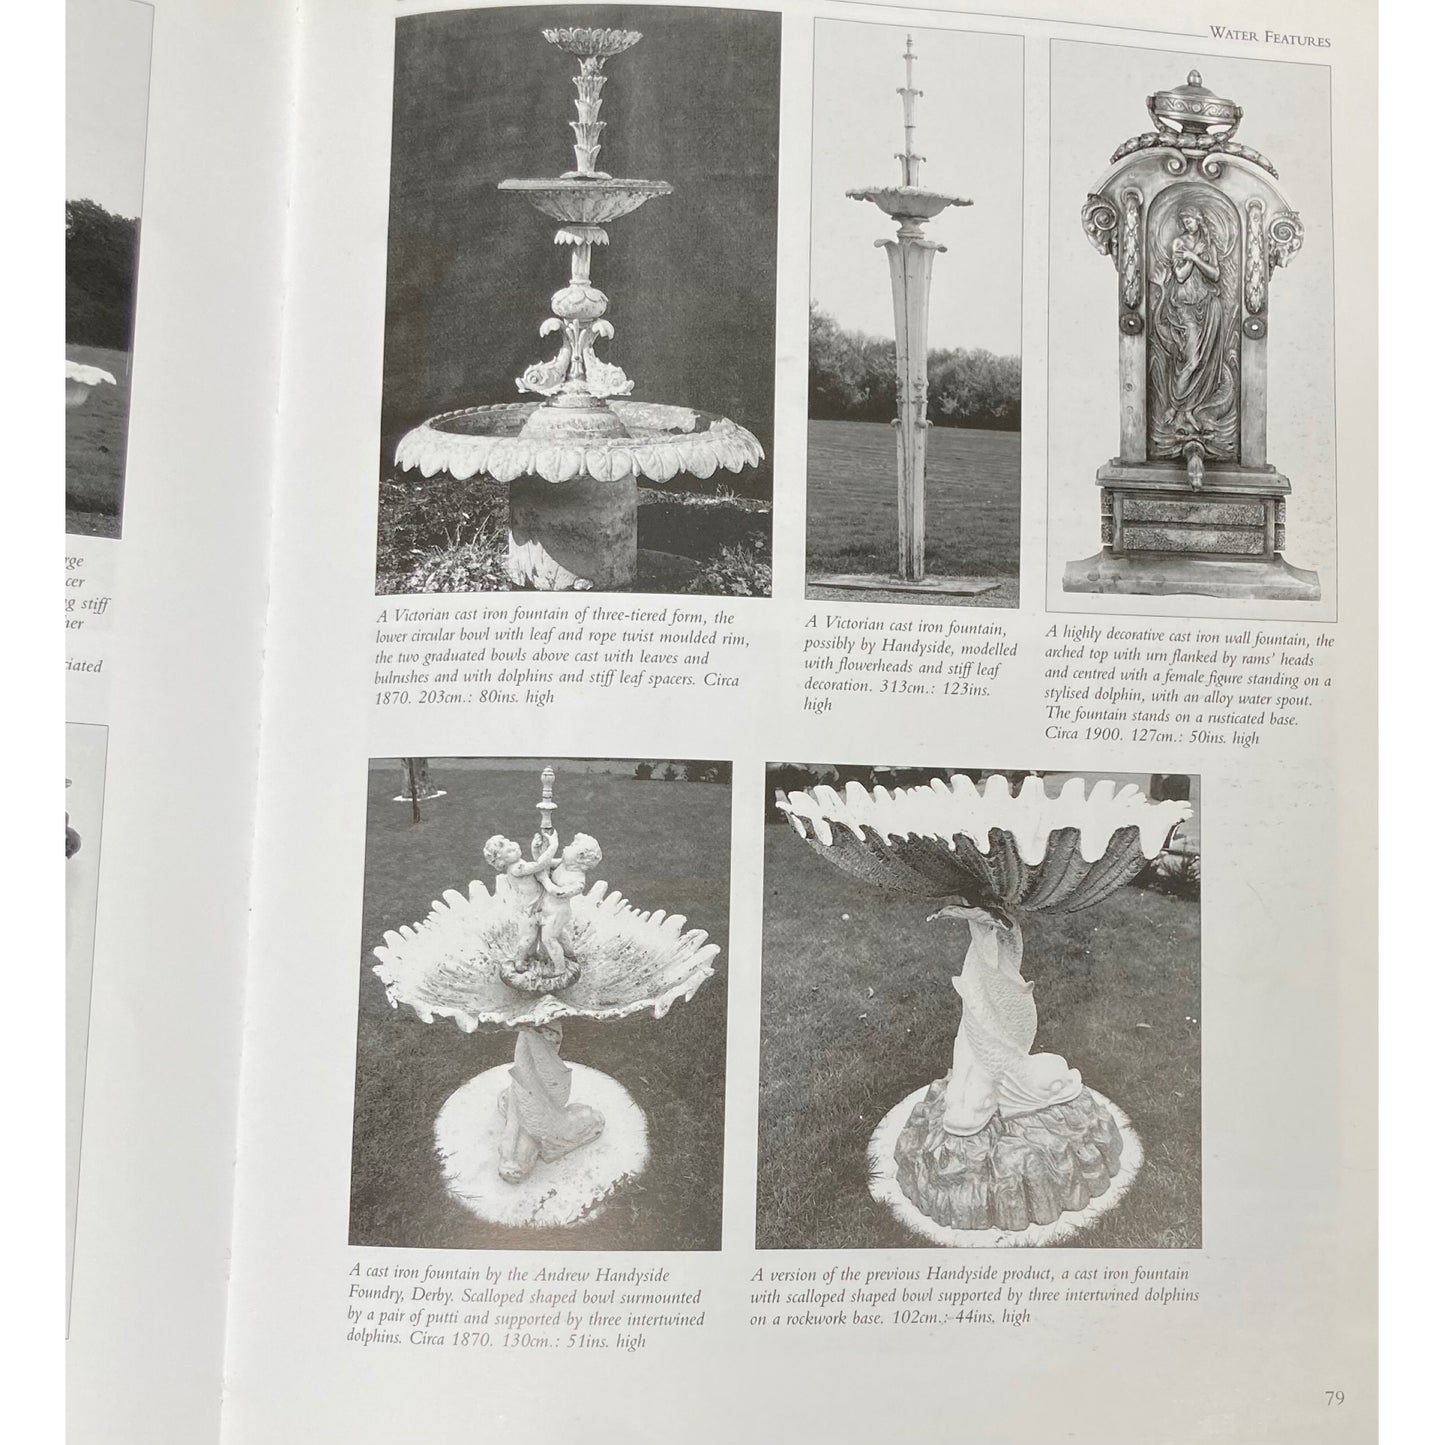 Scalloped Shell and Dolphin Fountain by Andrew Handyside c.1870